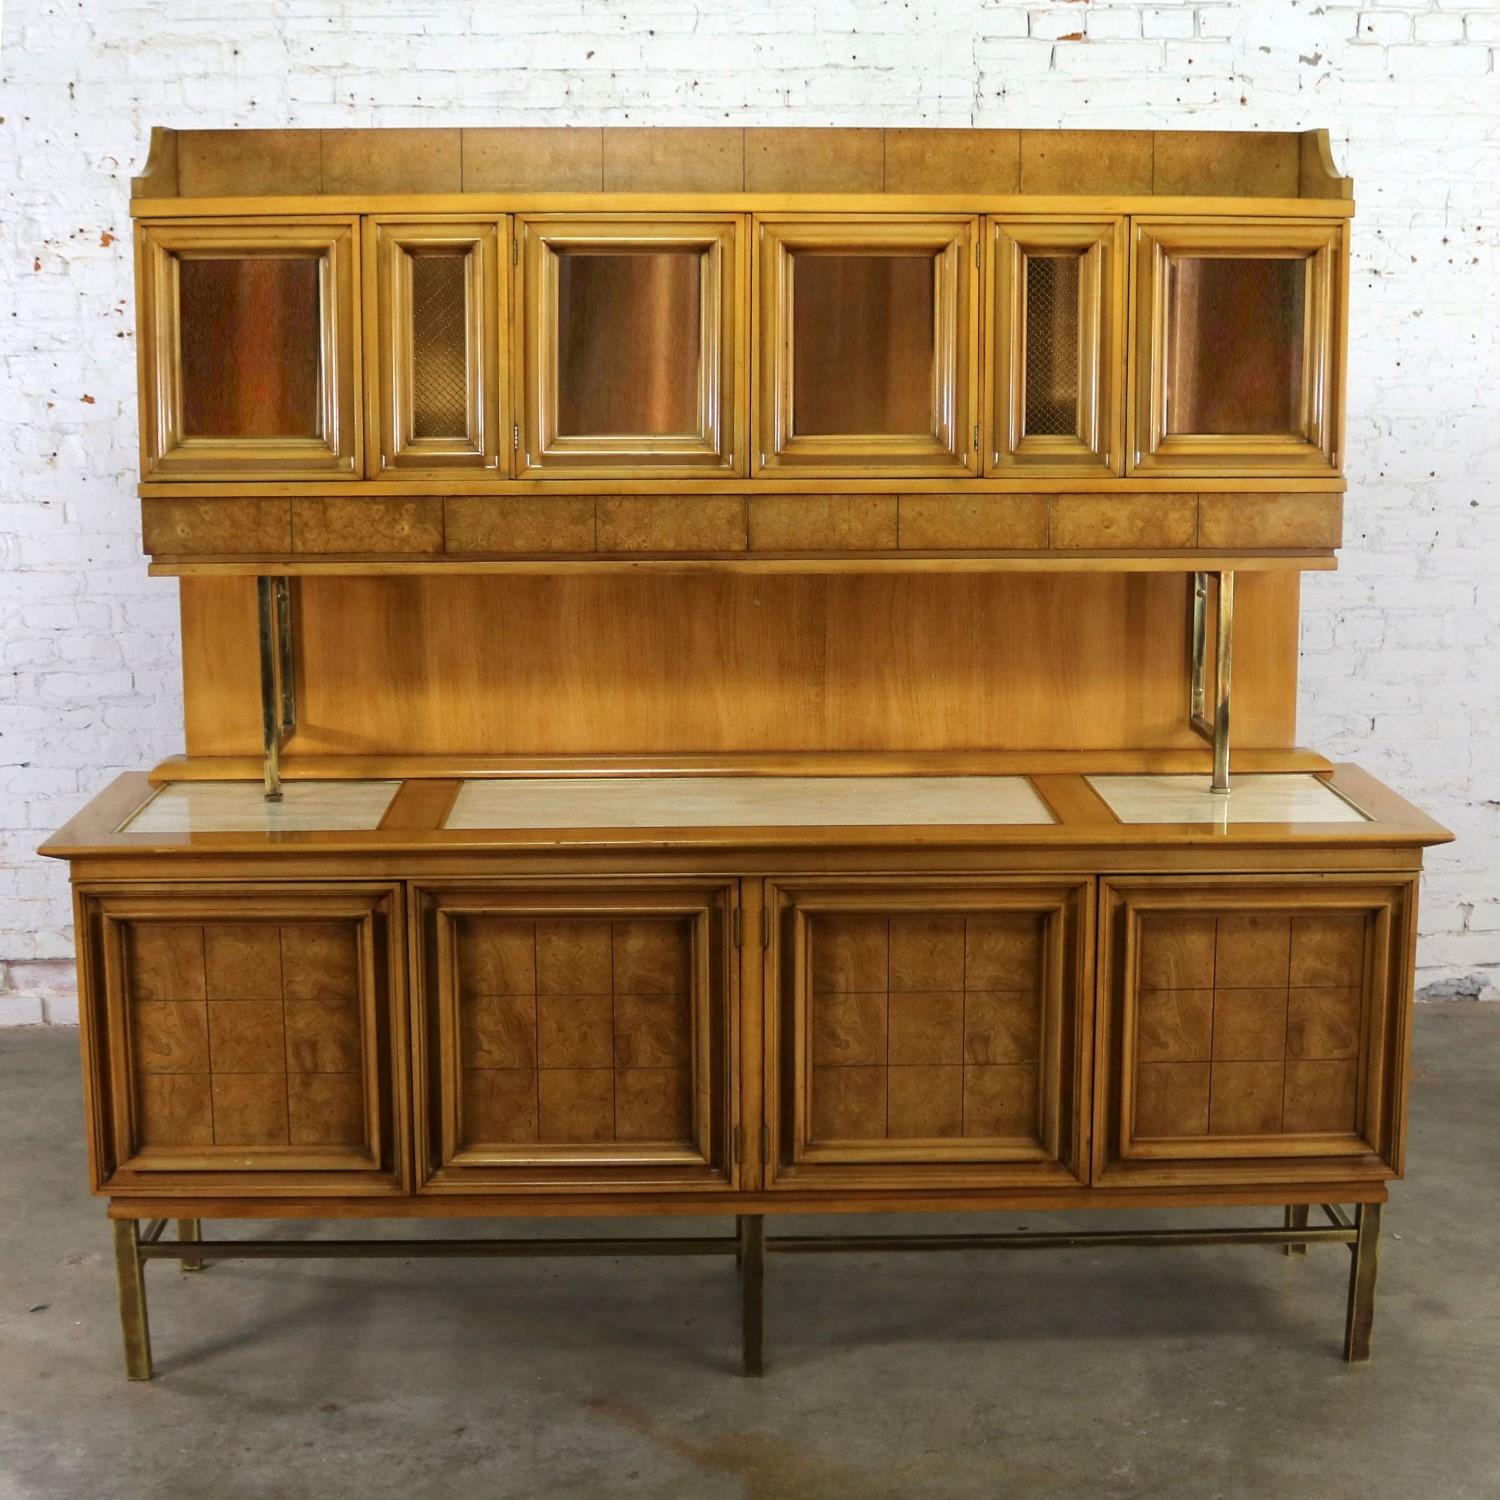 Handsome credenza with hutch top attributed to the J. L. Metz Furniture Company from their Contempora line. Made of weathered cherry and brass with travertine top inserts. It is in fabulous vintage condition with purposeful patina on the brass and